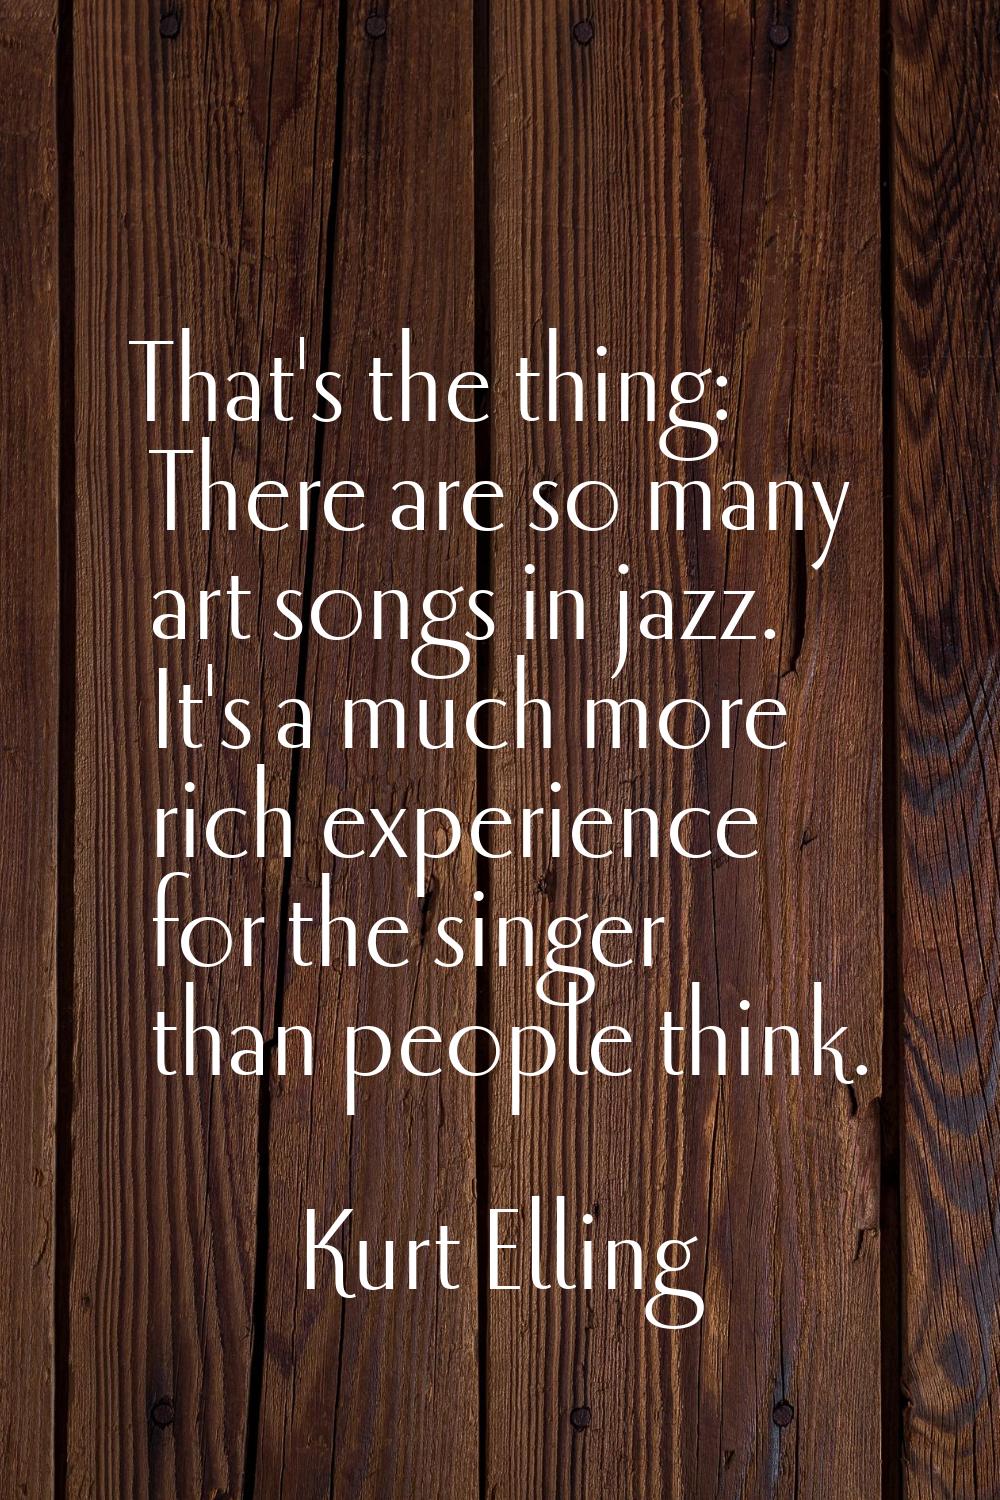 That's the thing: There are so many art songs in jazz. It's a much more rich experience for the sin